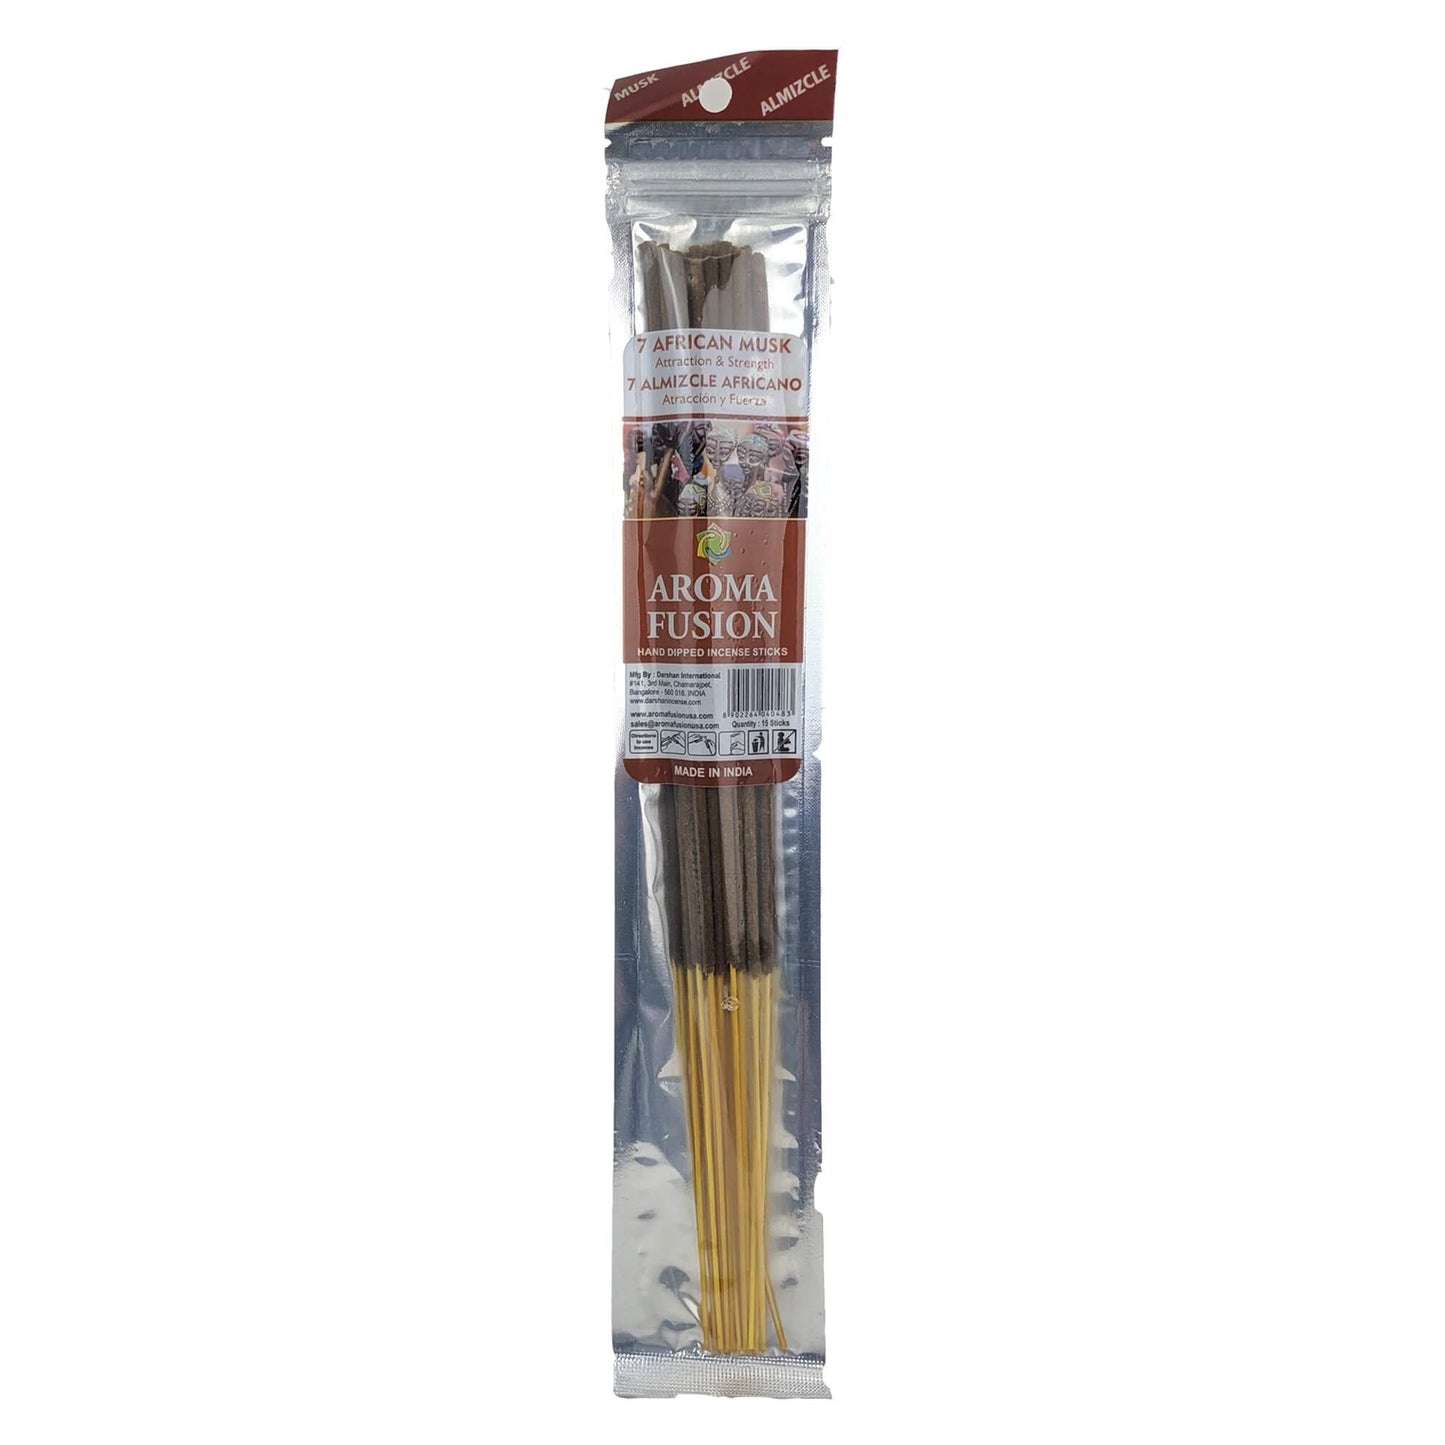 Aroma Fusion Incense 7 African Musk 2